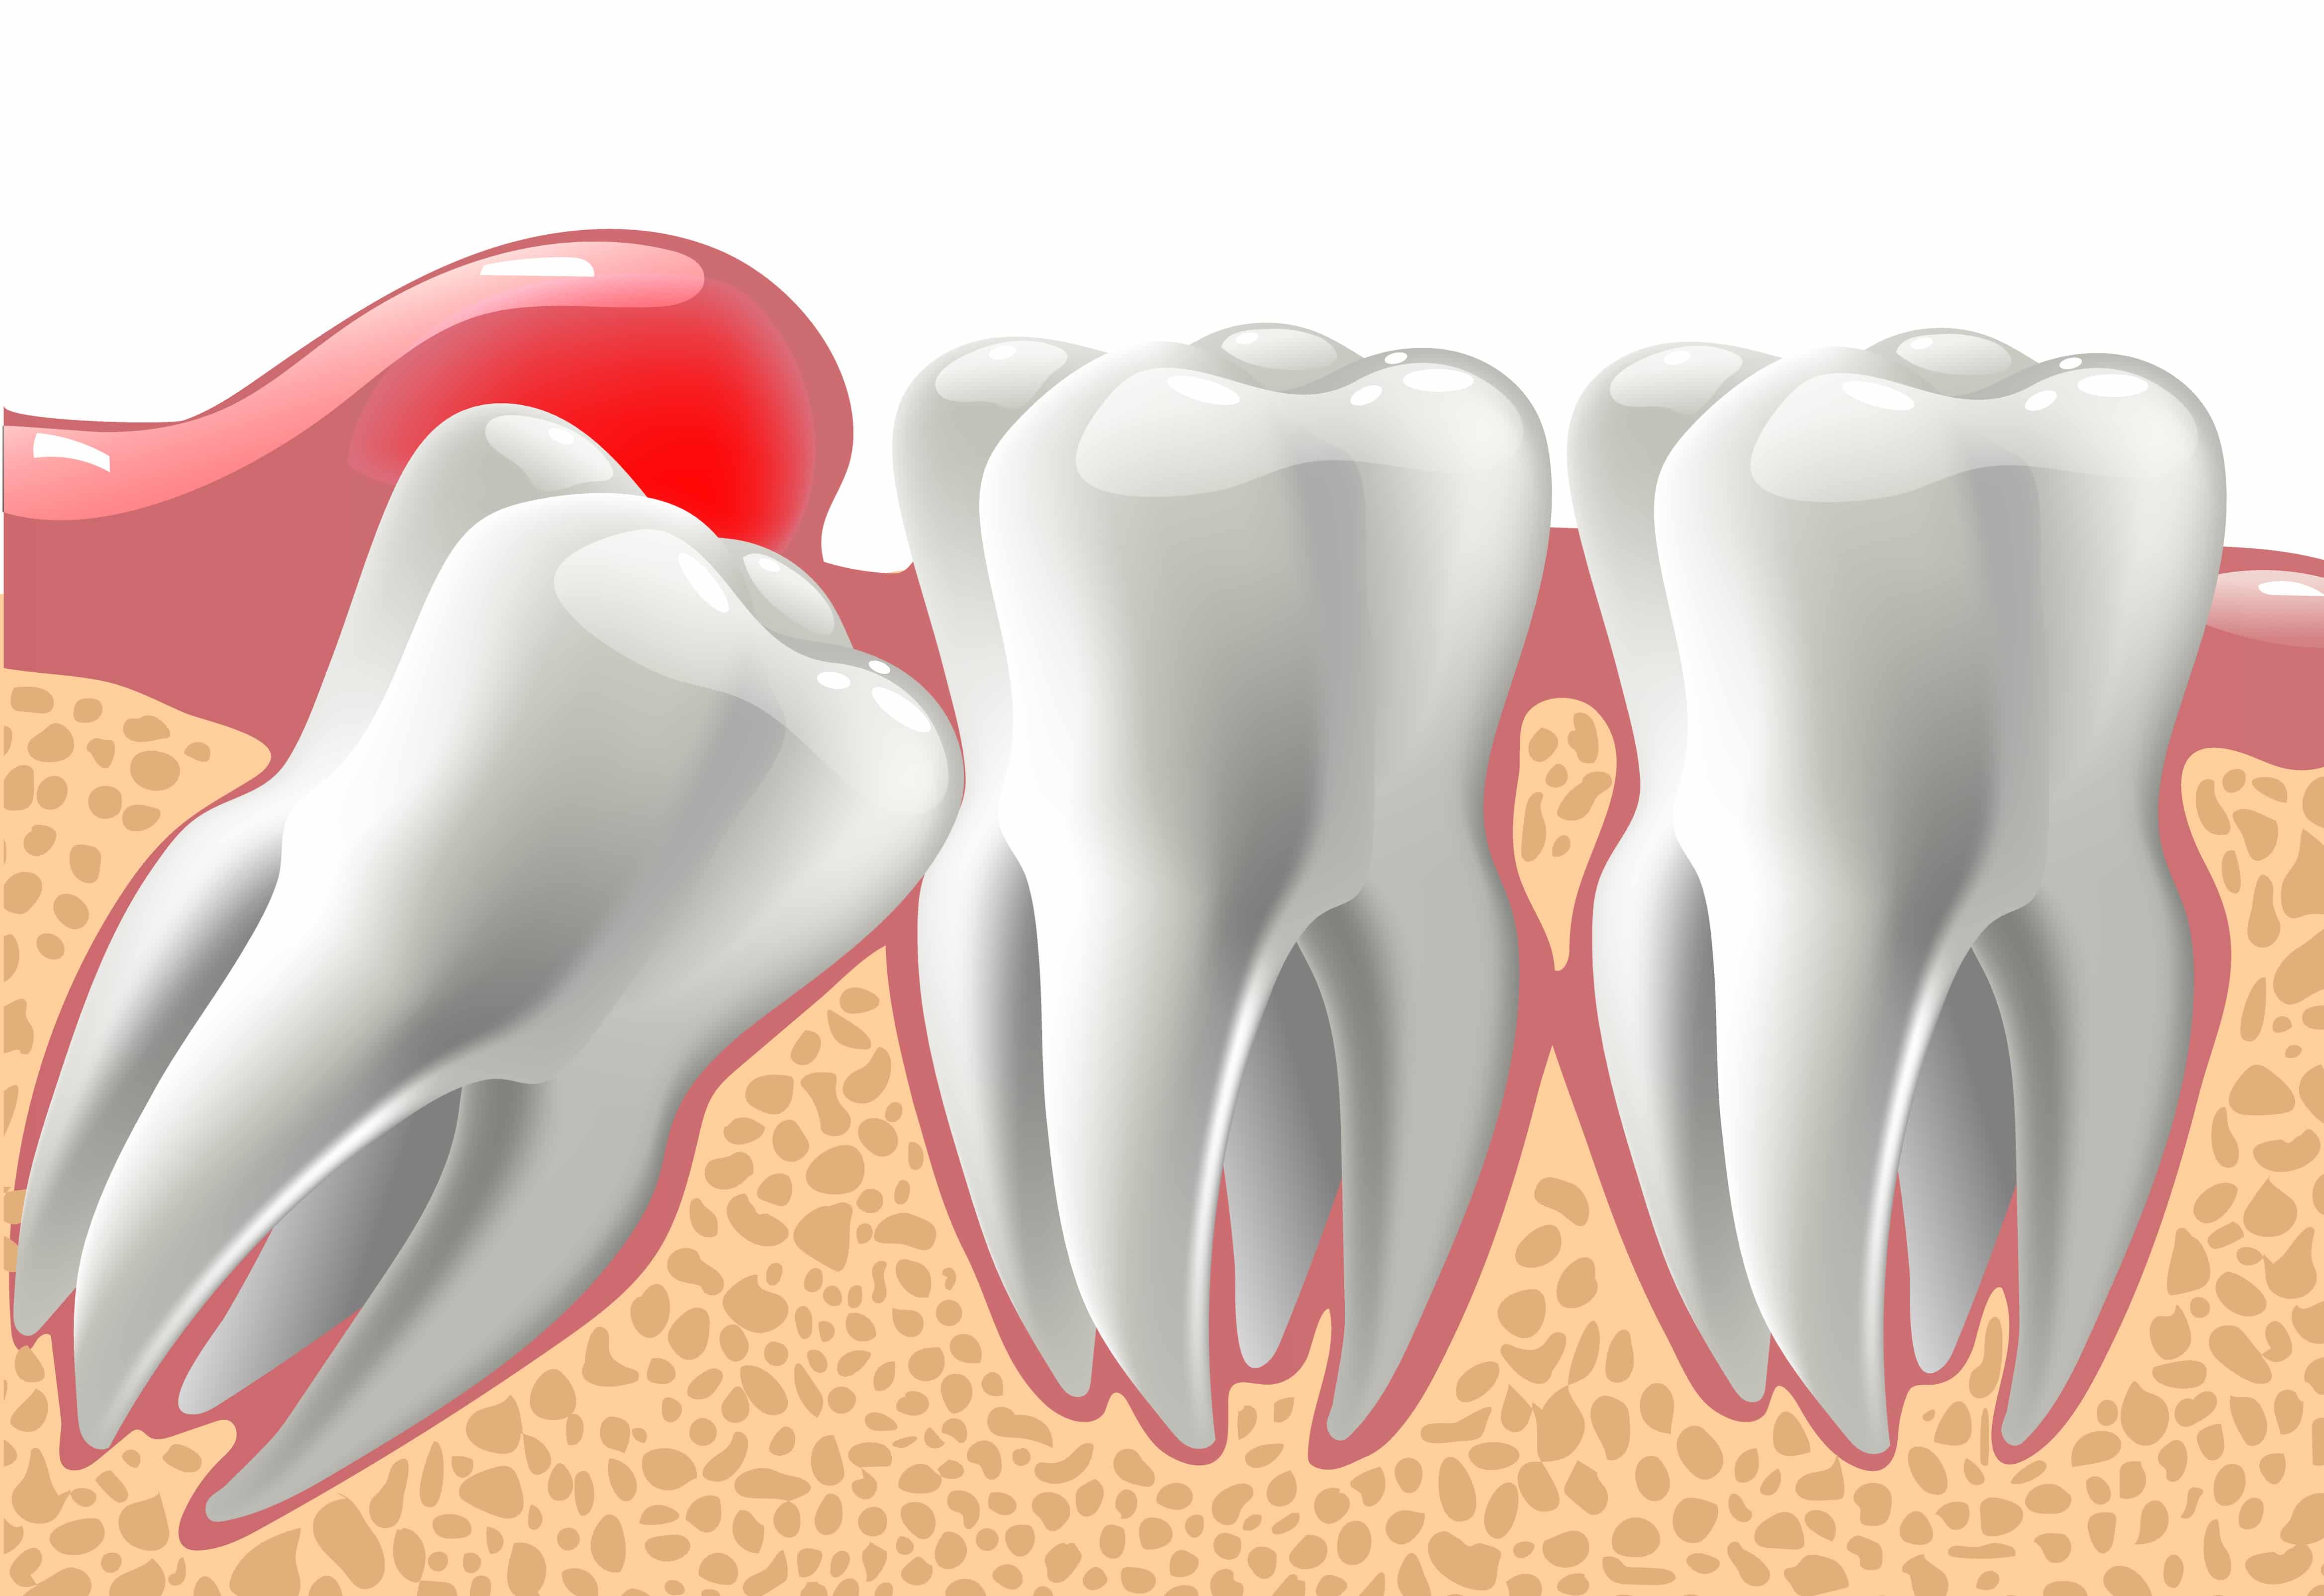 Illustration of an wisdom tooth under the gum line